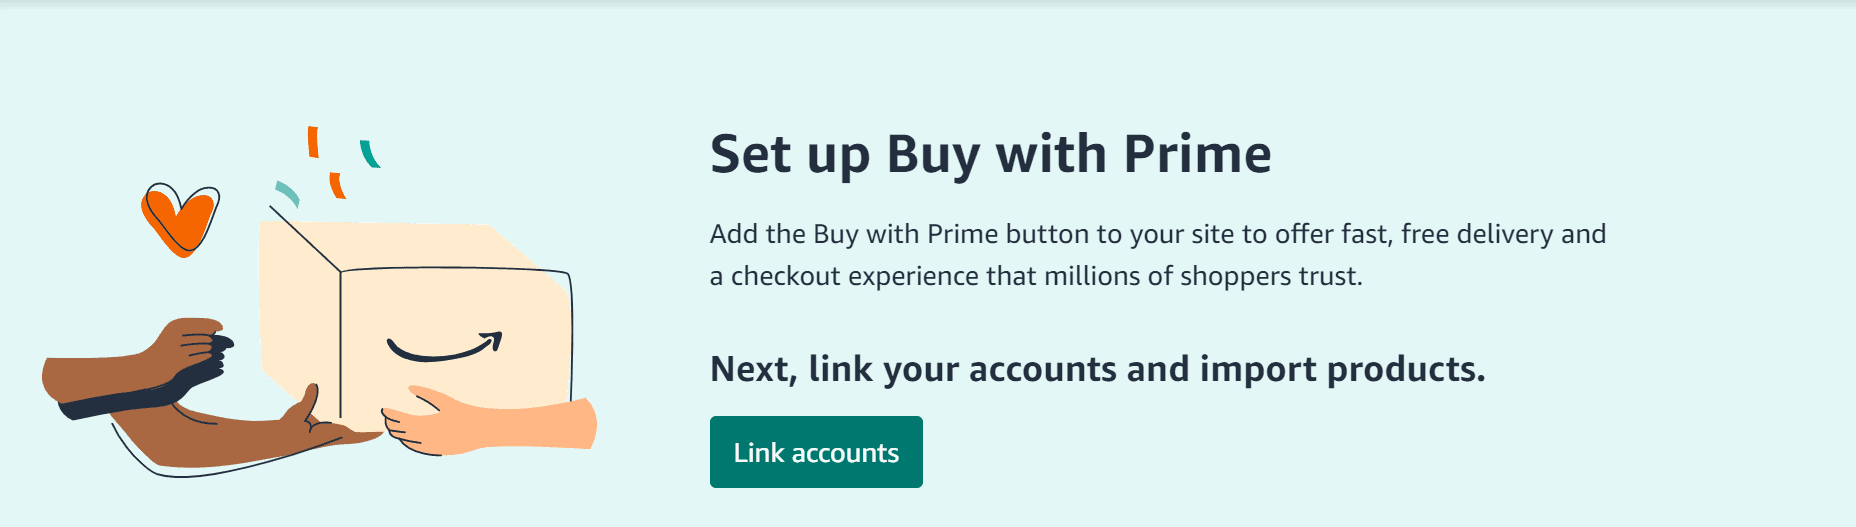 Link accounts on Buy with Prime Portal